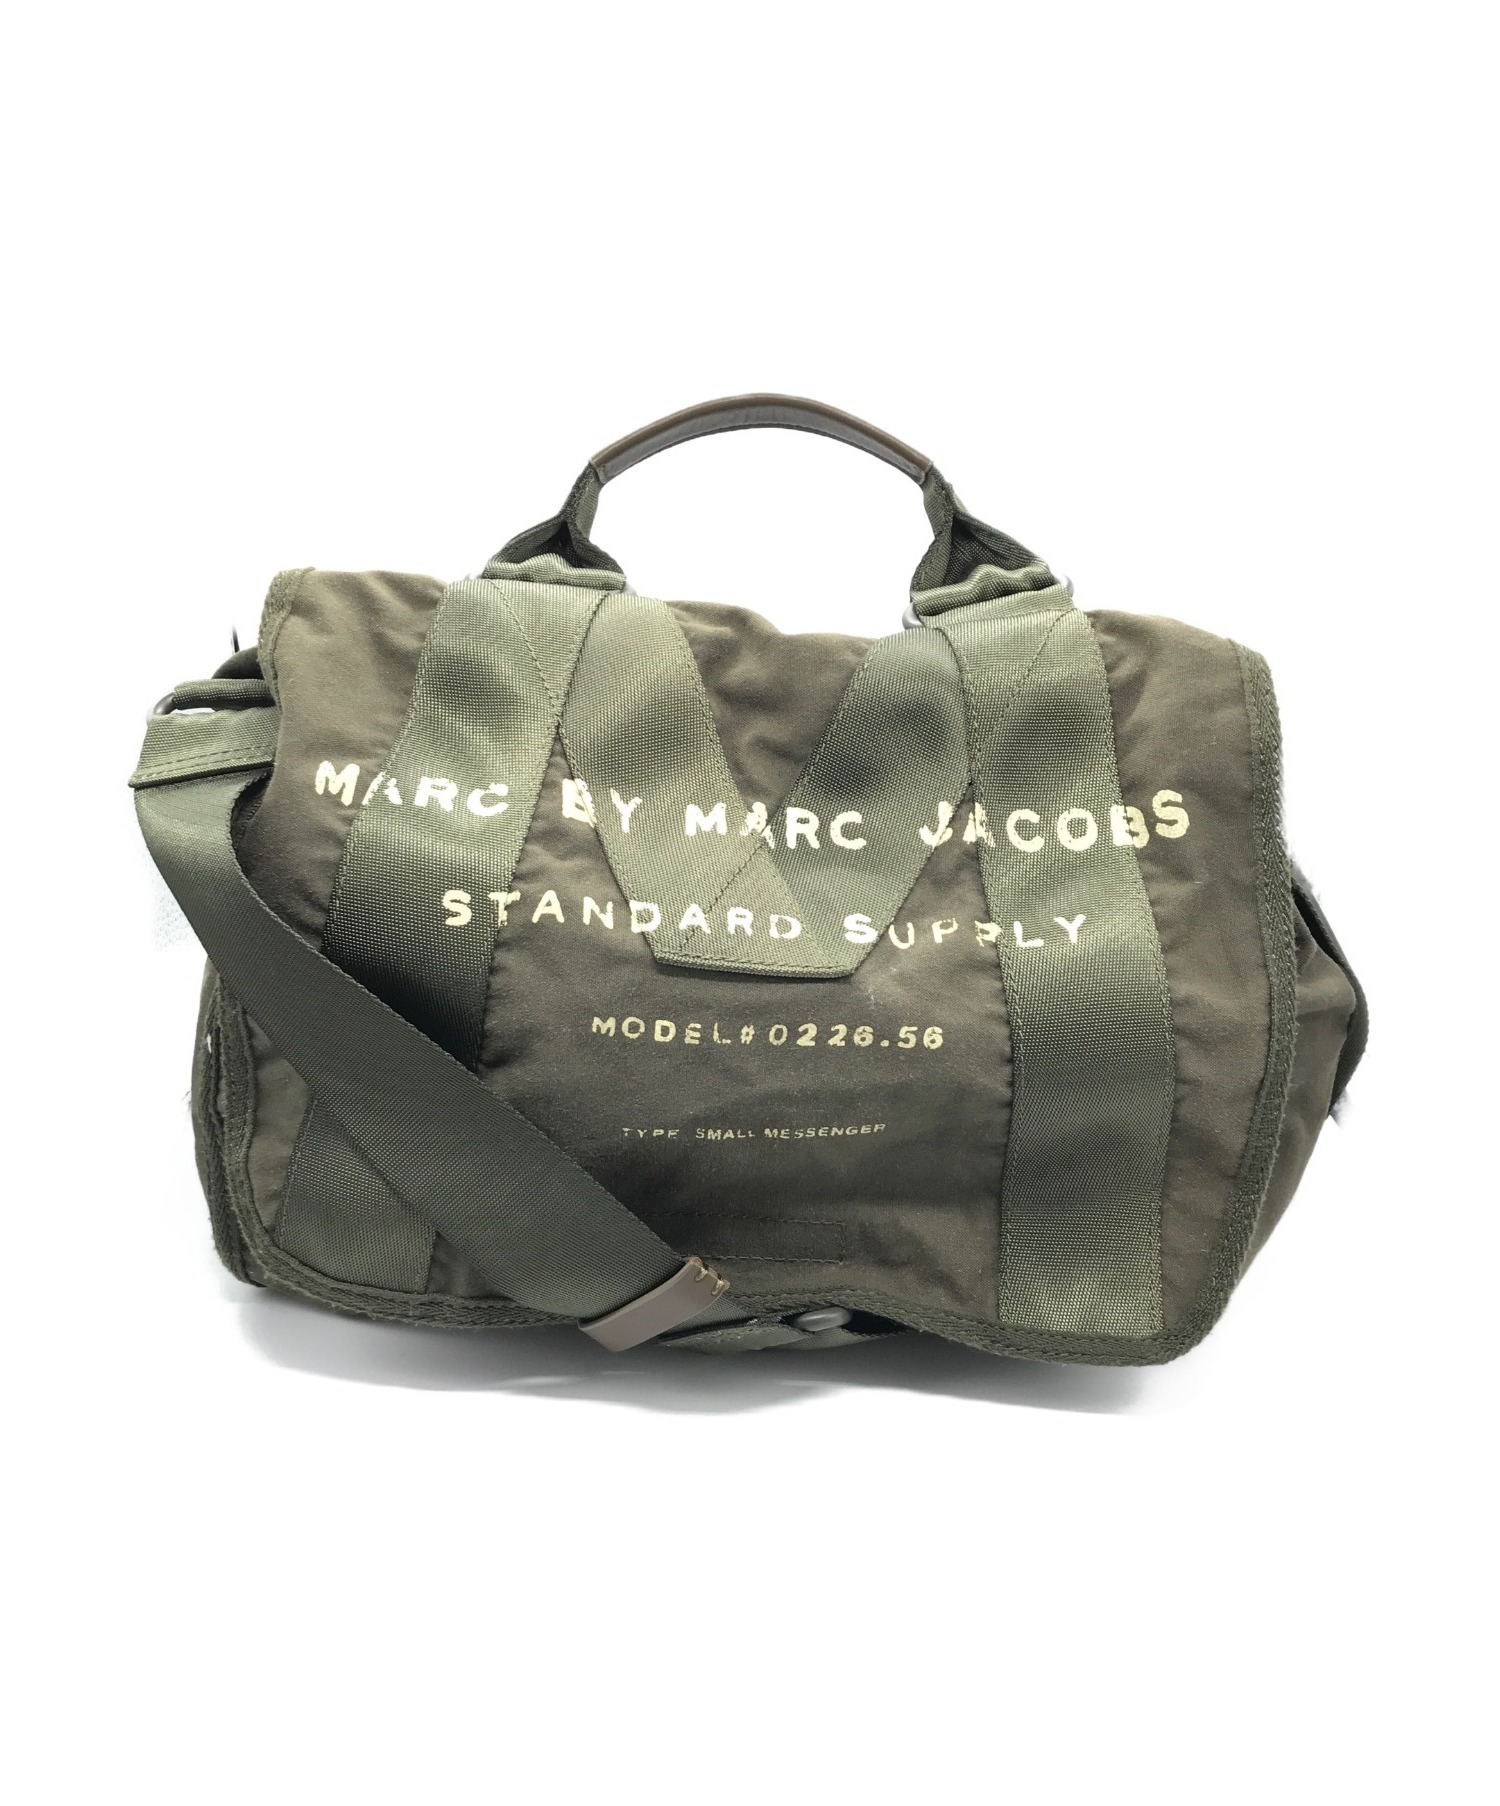 MARC by MARC JACOBSミリタリーバッグ☆ - ショルダーバッグ